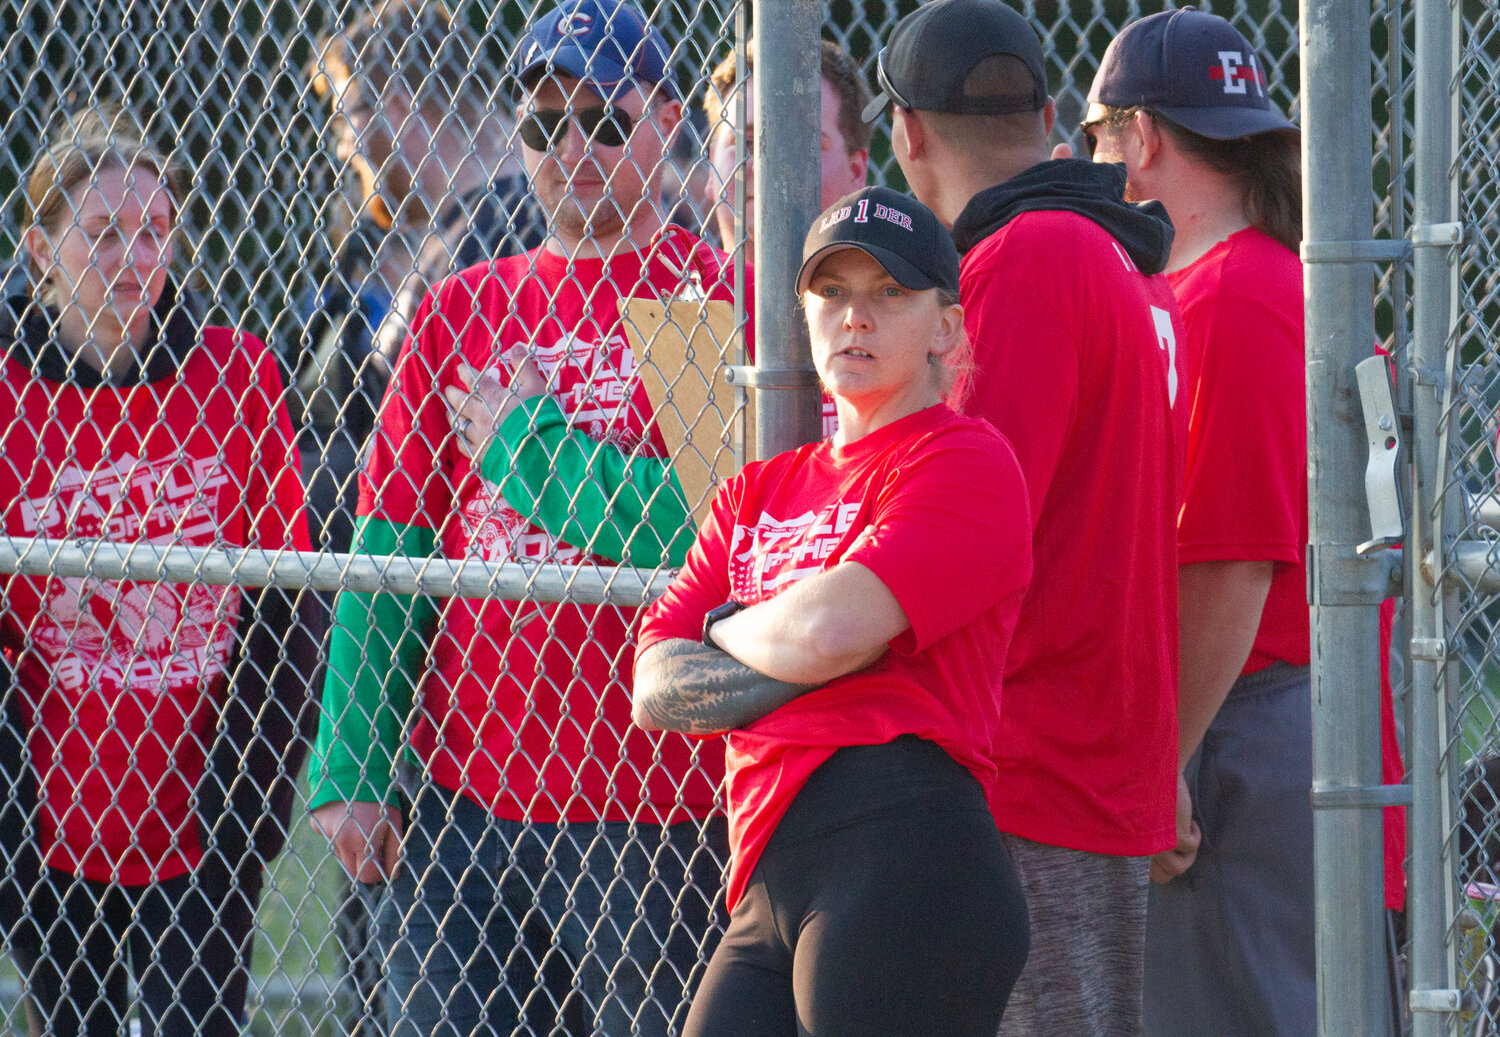 Emily Masse looks on during the game.